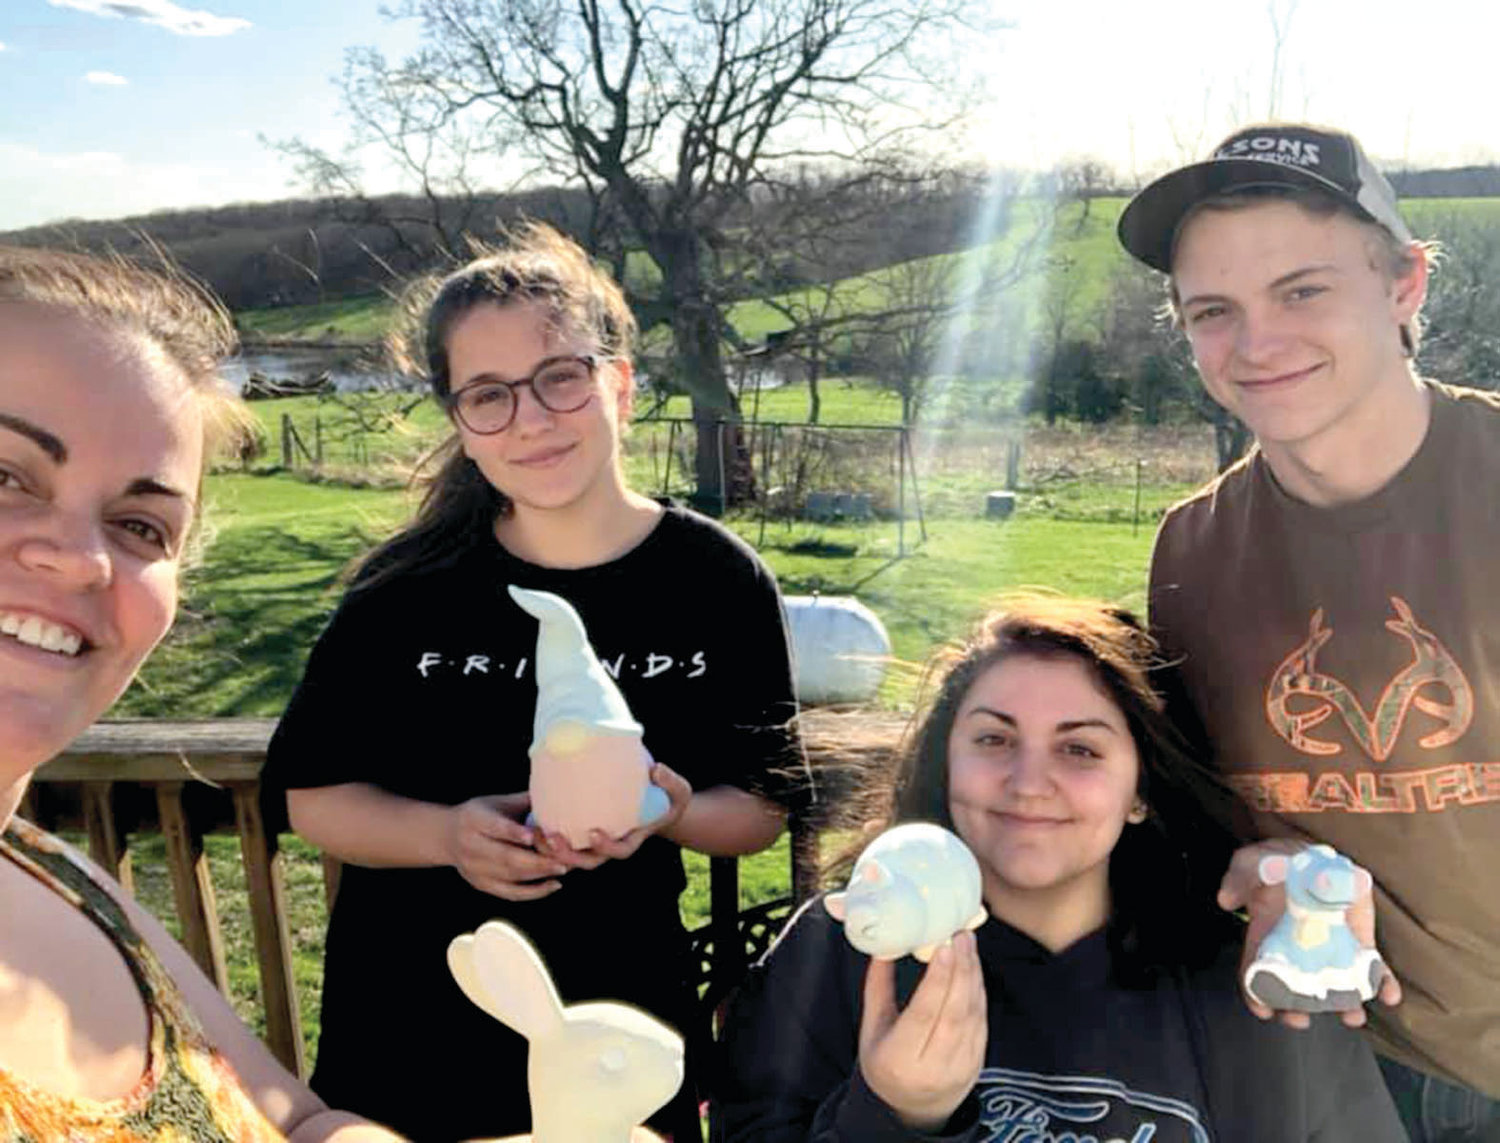 Frances Boswell, Arianna Cingolani, Abigail Boswell and Ryan Vandergrift recently had a ceramic-painting party.